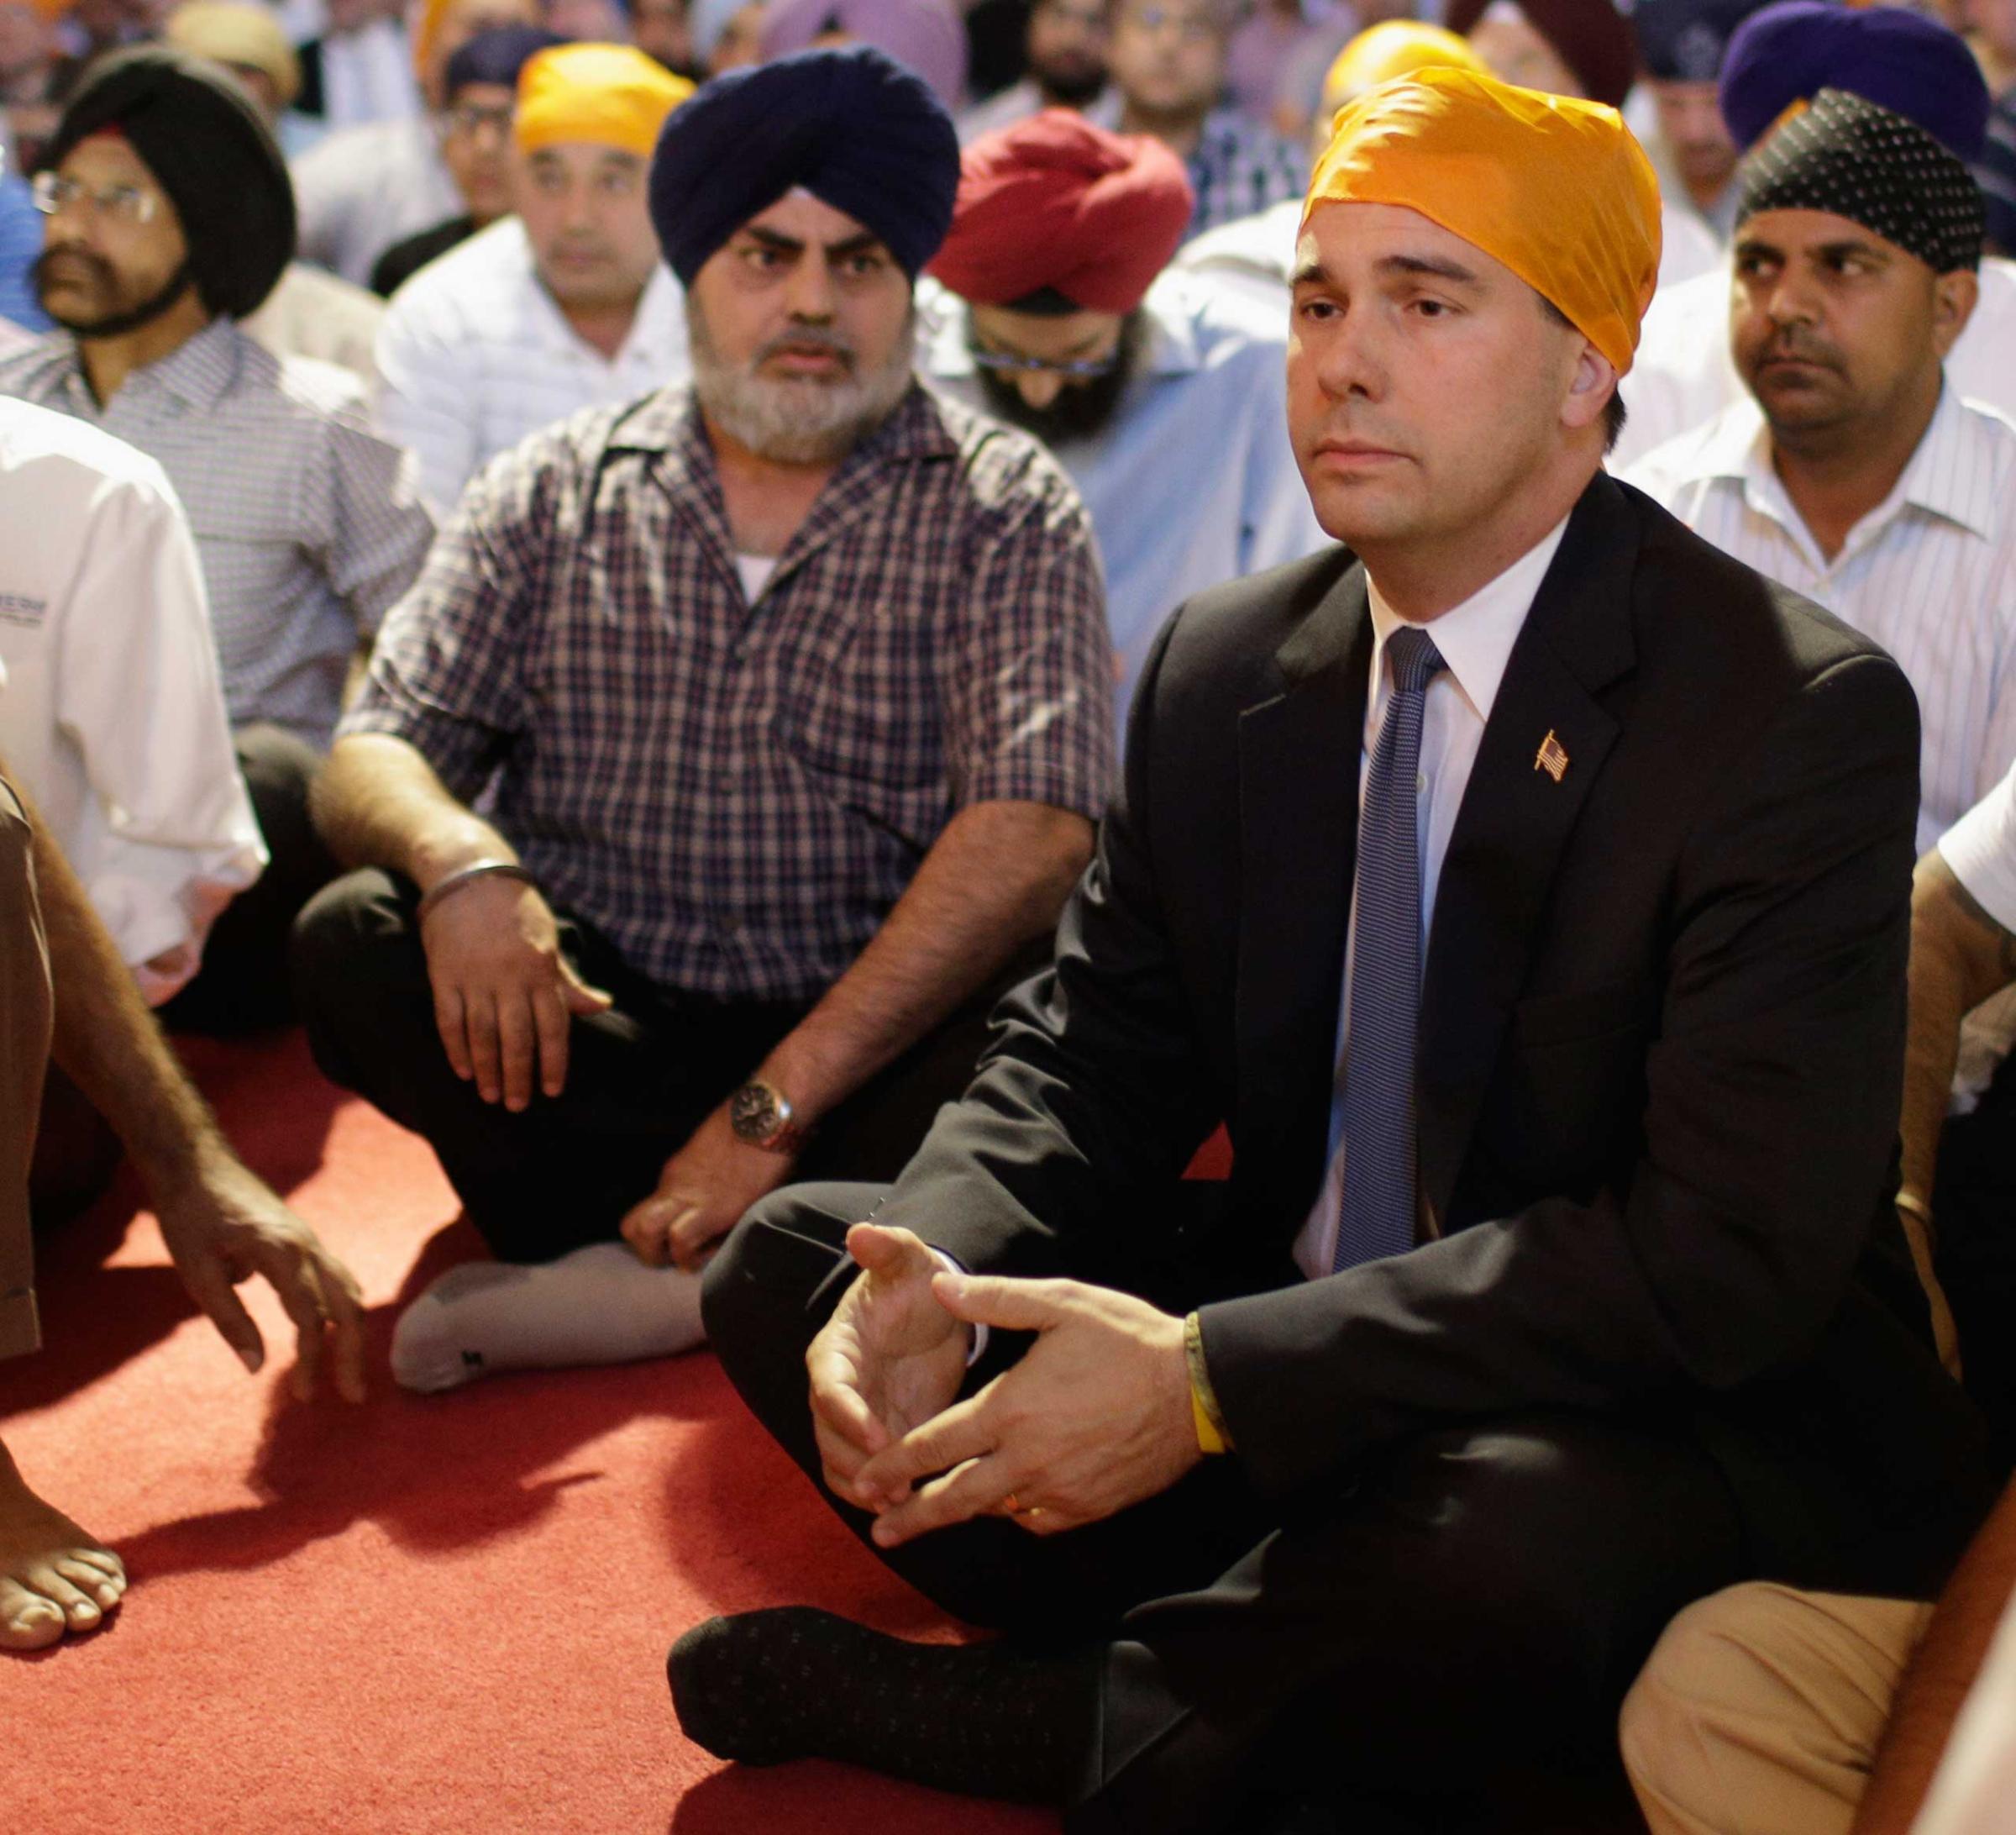 Wisconsin Governor Scott Walker attends a prayer service at the Sikh Temple in Brookfield, Wis., on August 6, 2012.